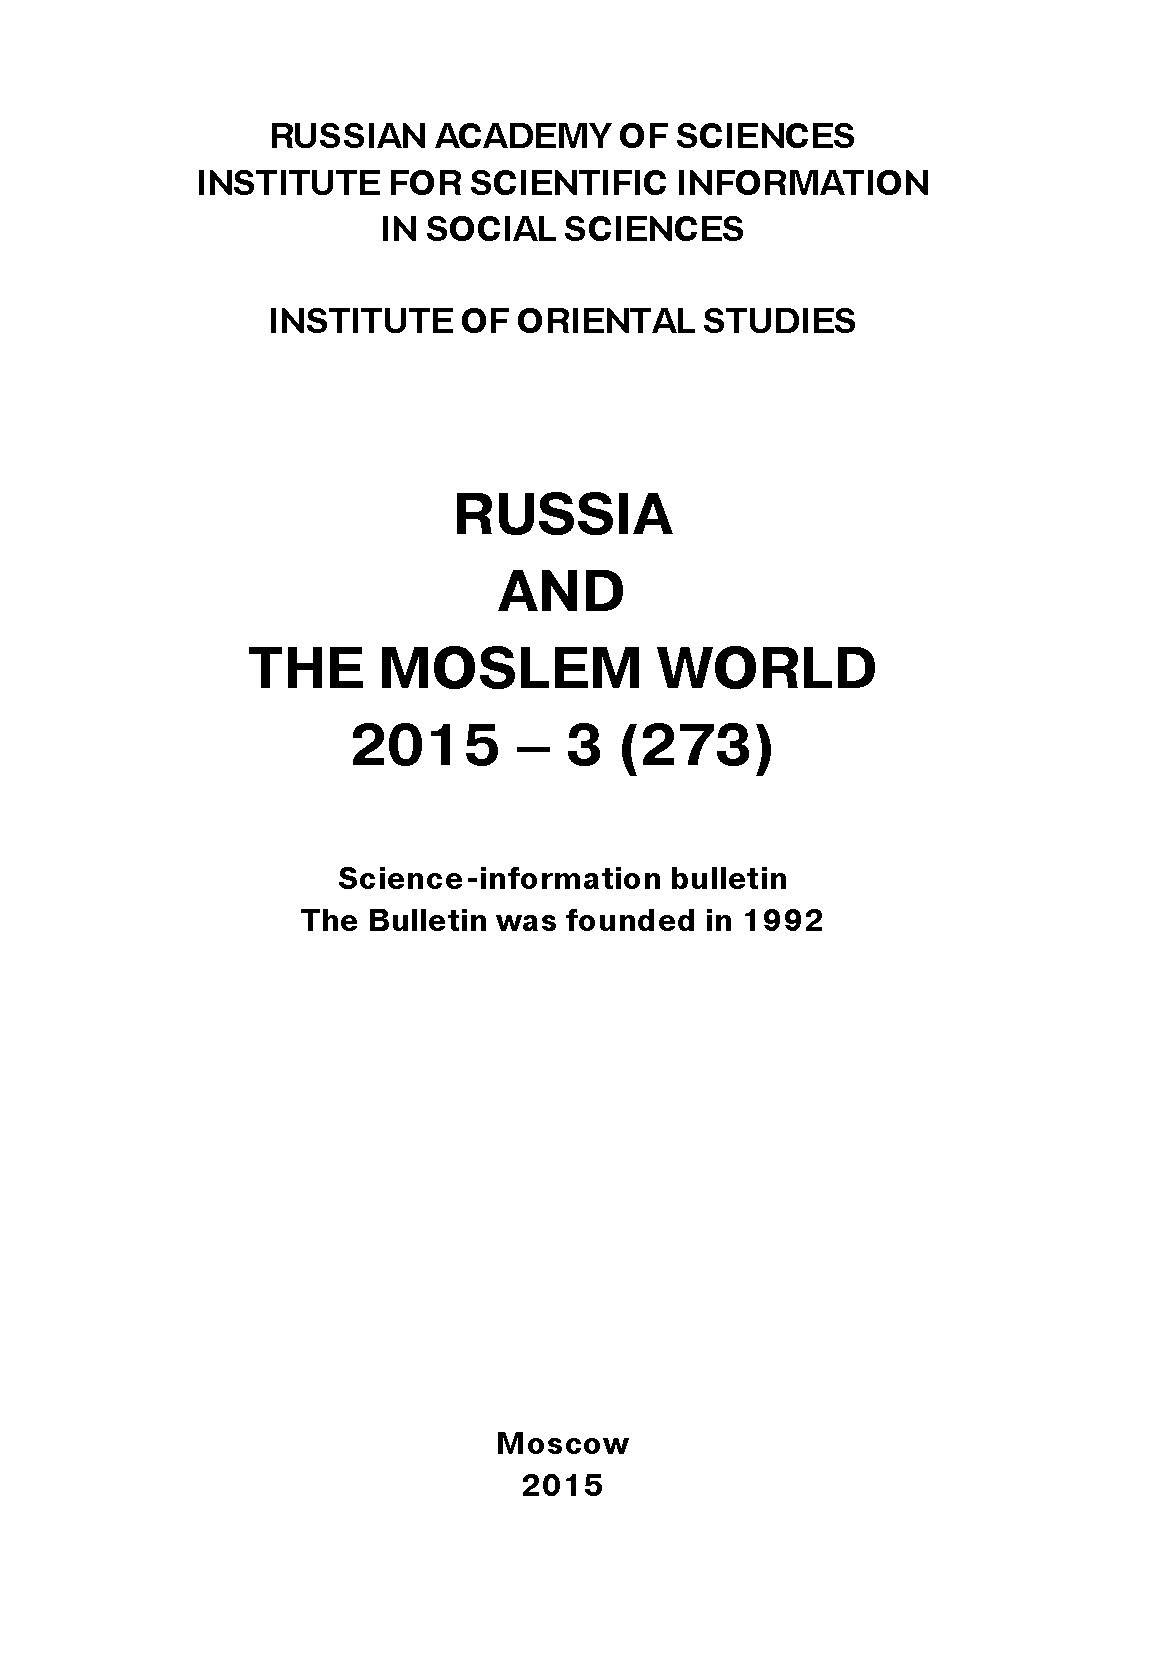 Russia and the Moslem World№ 03 / 2015